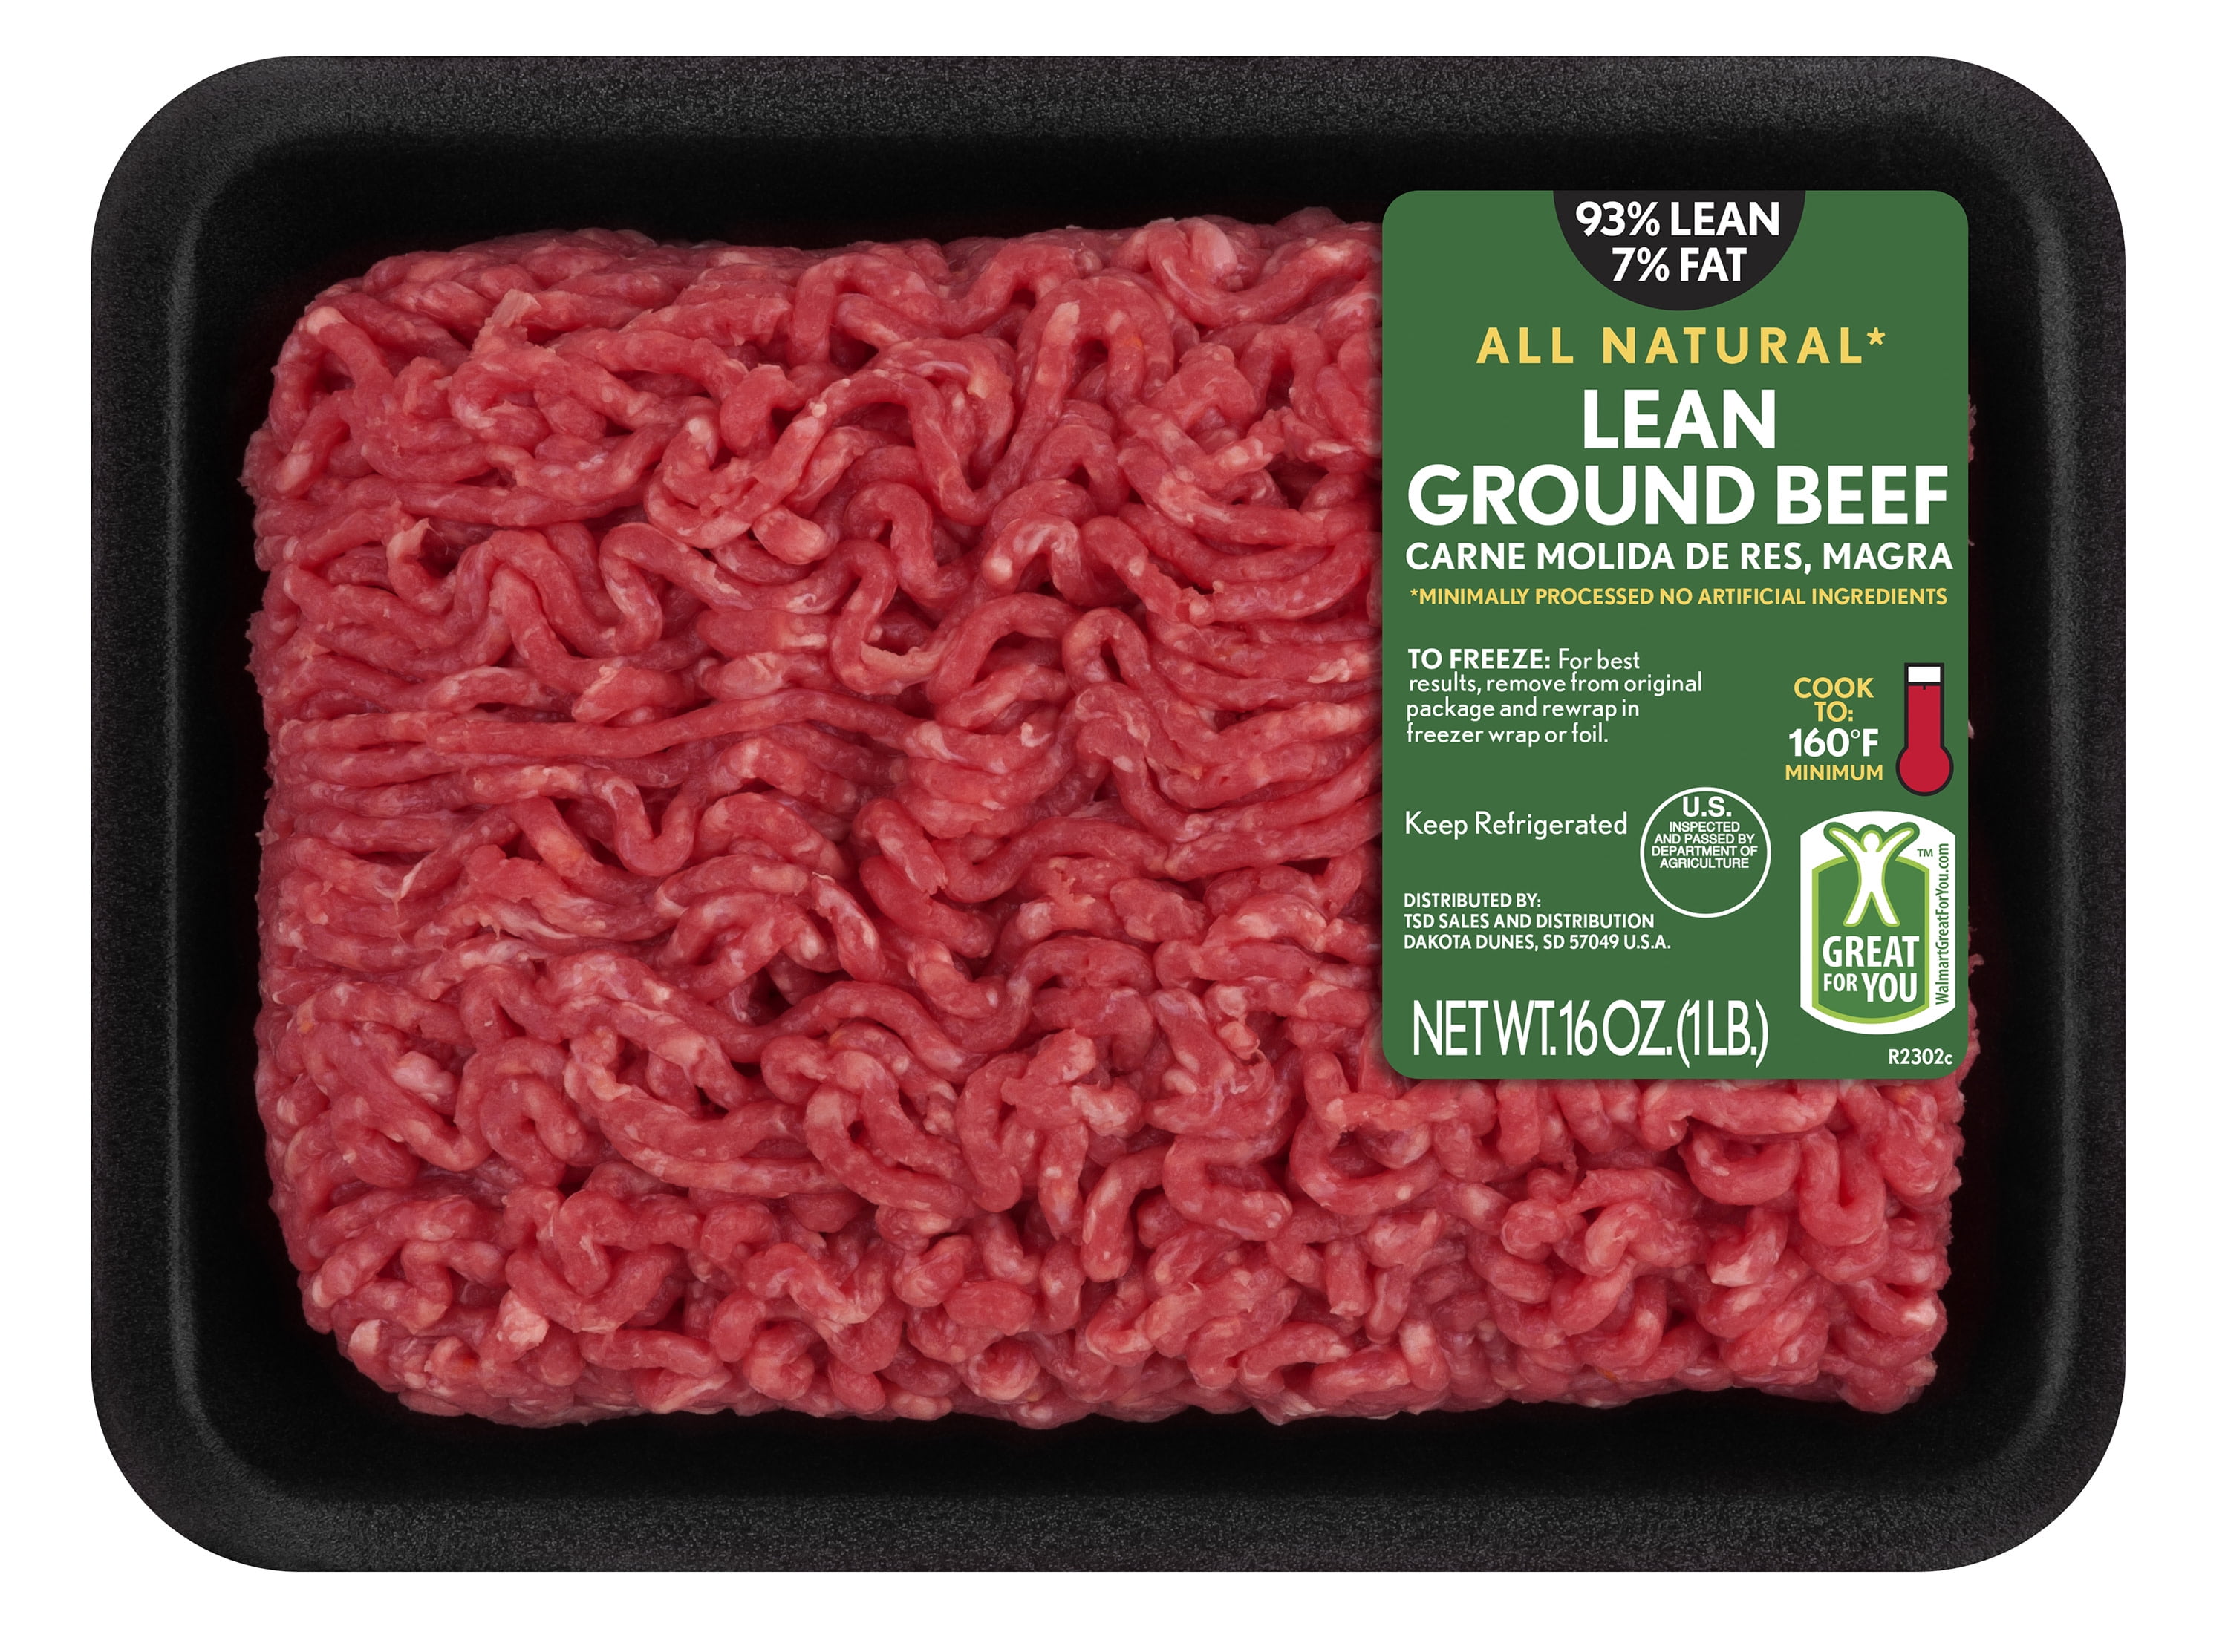 How Many Ounces in a Pound of Ground Beef?